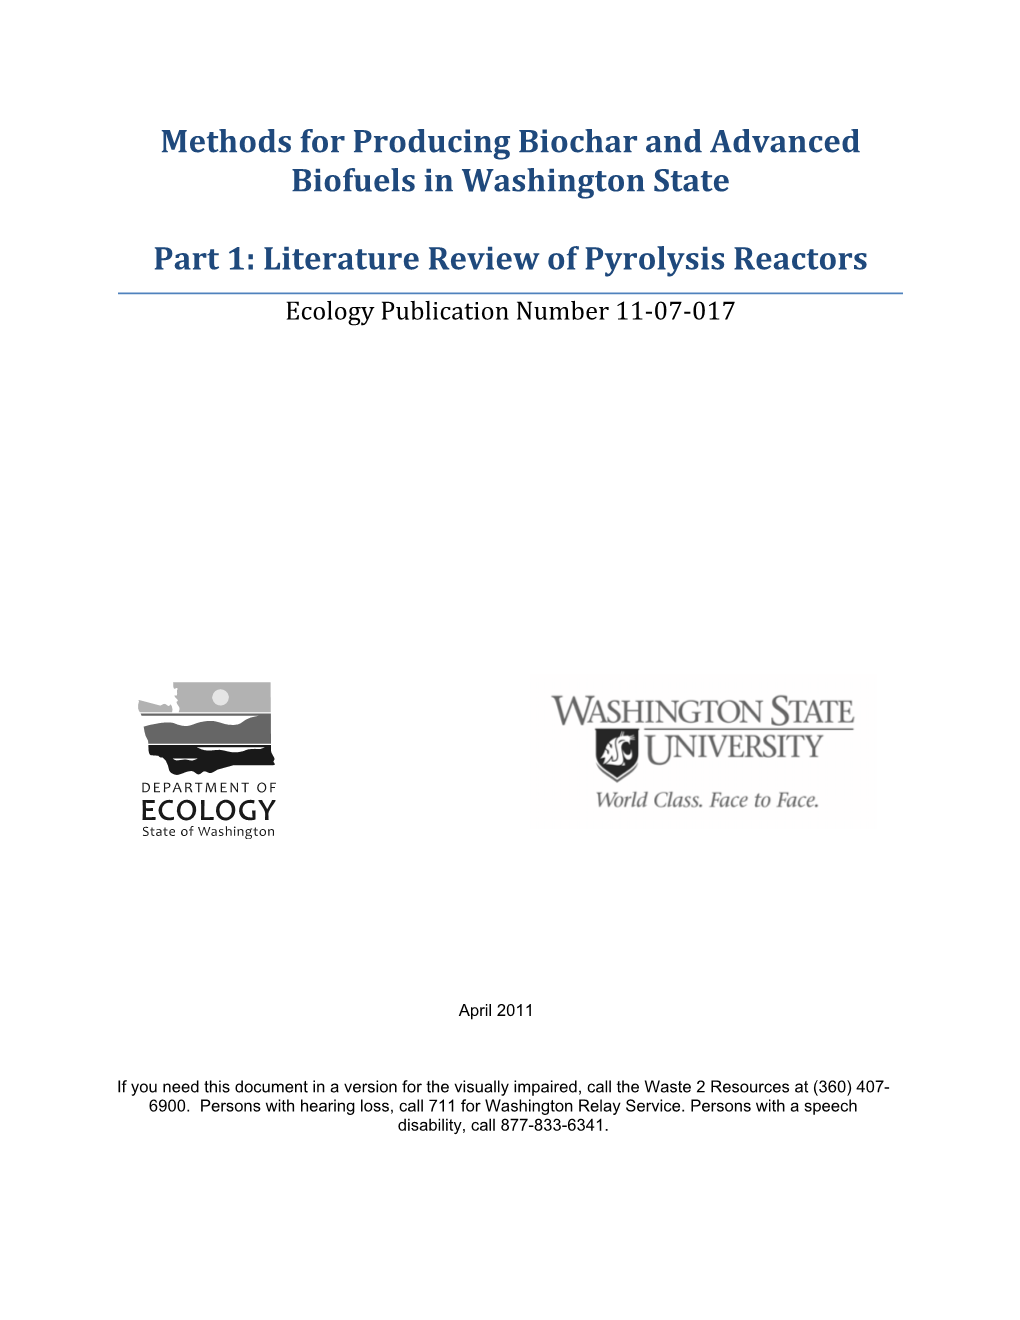 Methods for Producing Biochar and Advanced Biofuels in Washington State